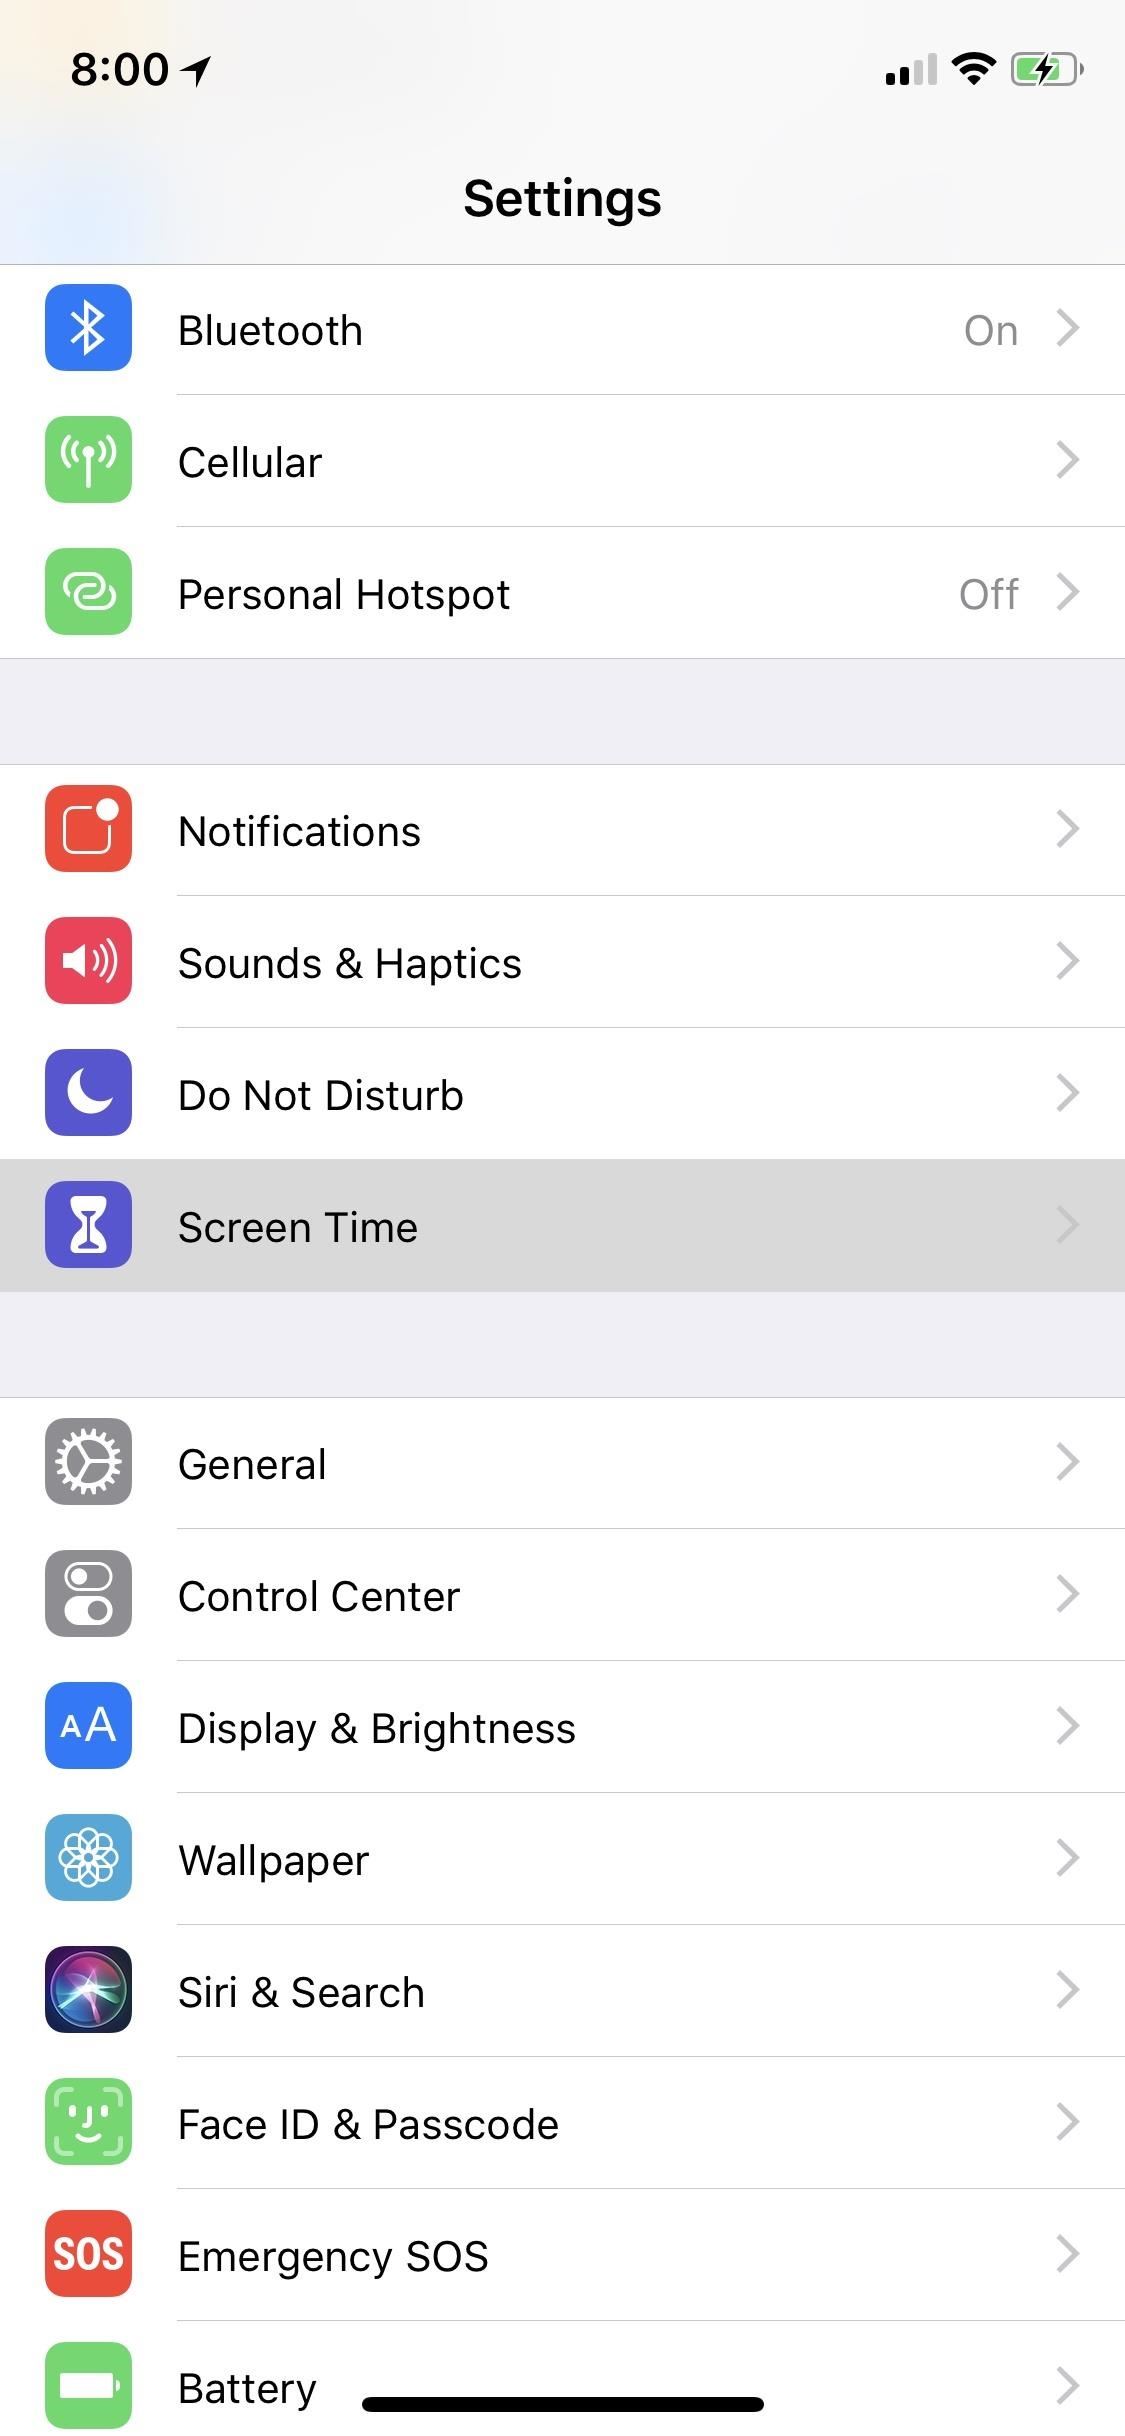 How to Set App Limits on Your iPhone to Restrict All-Day Access to Games & Other Addictive Apps